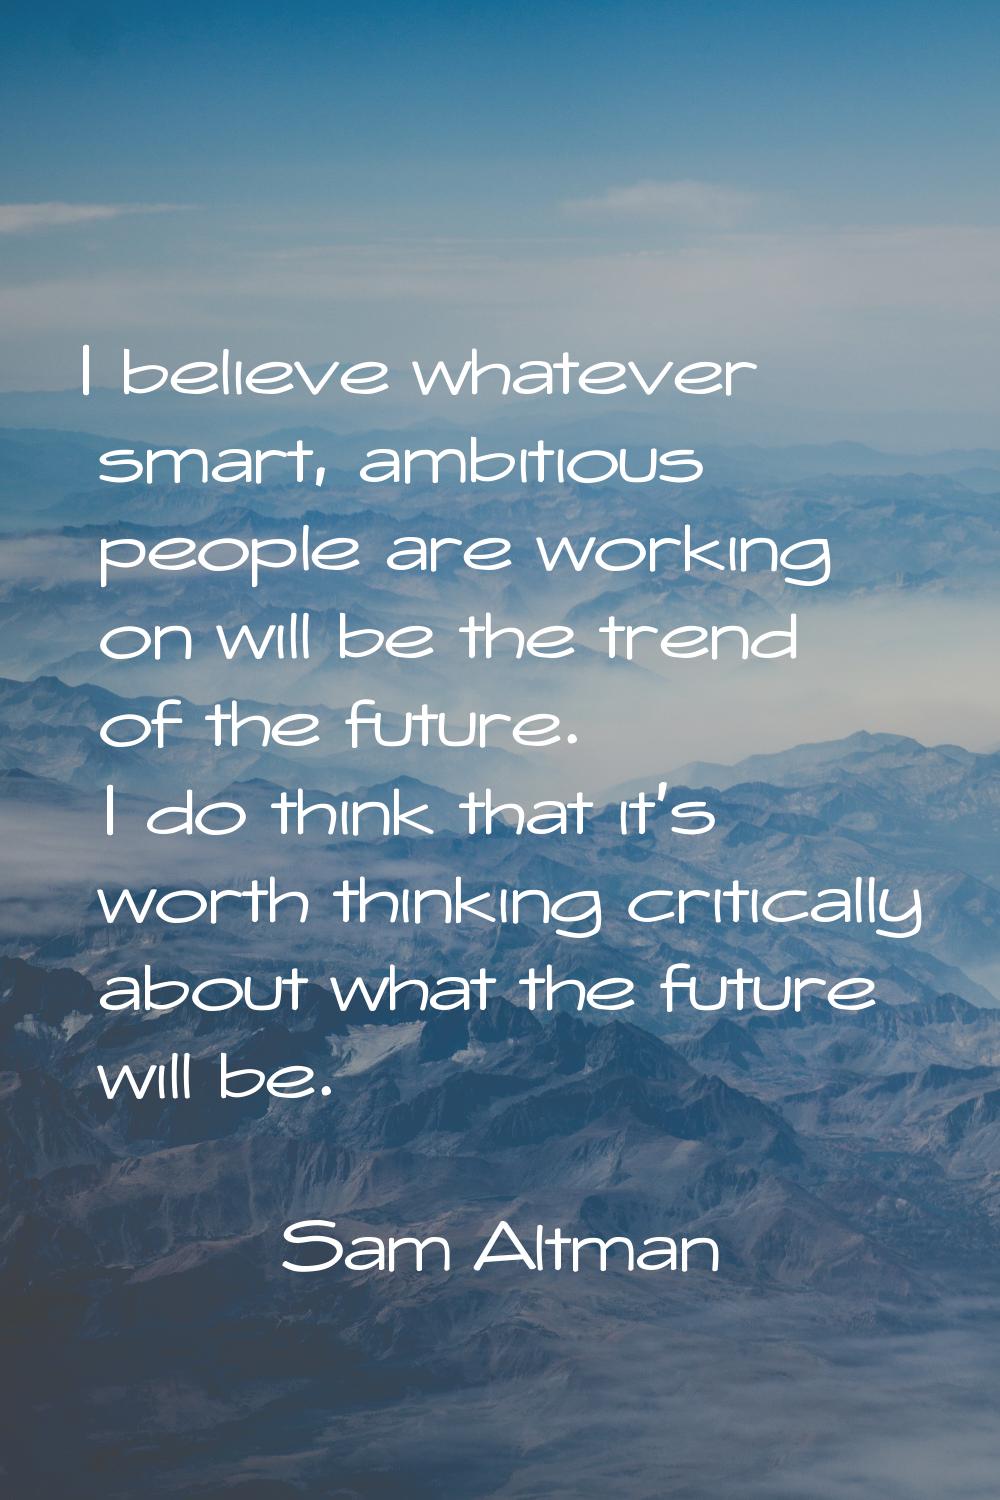 I believe whatever smart, ambitious people are working on will be the trend of the future. I do thi